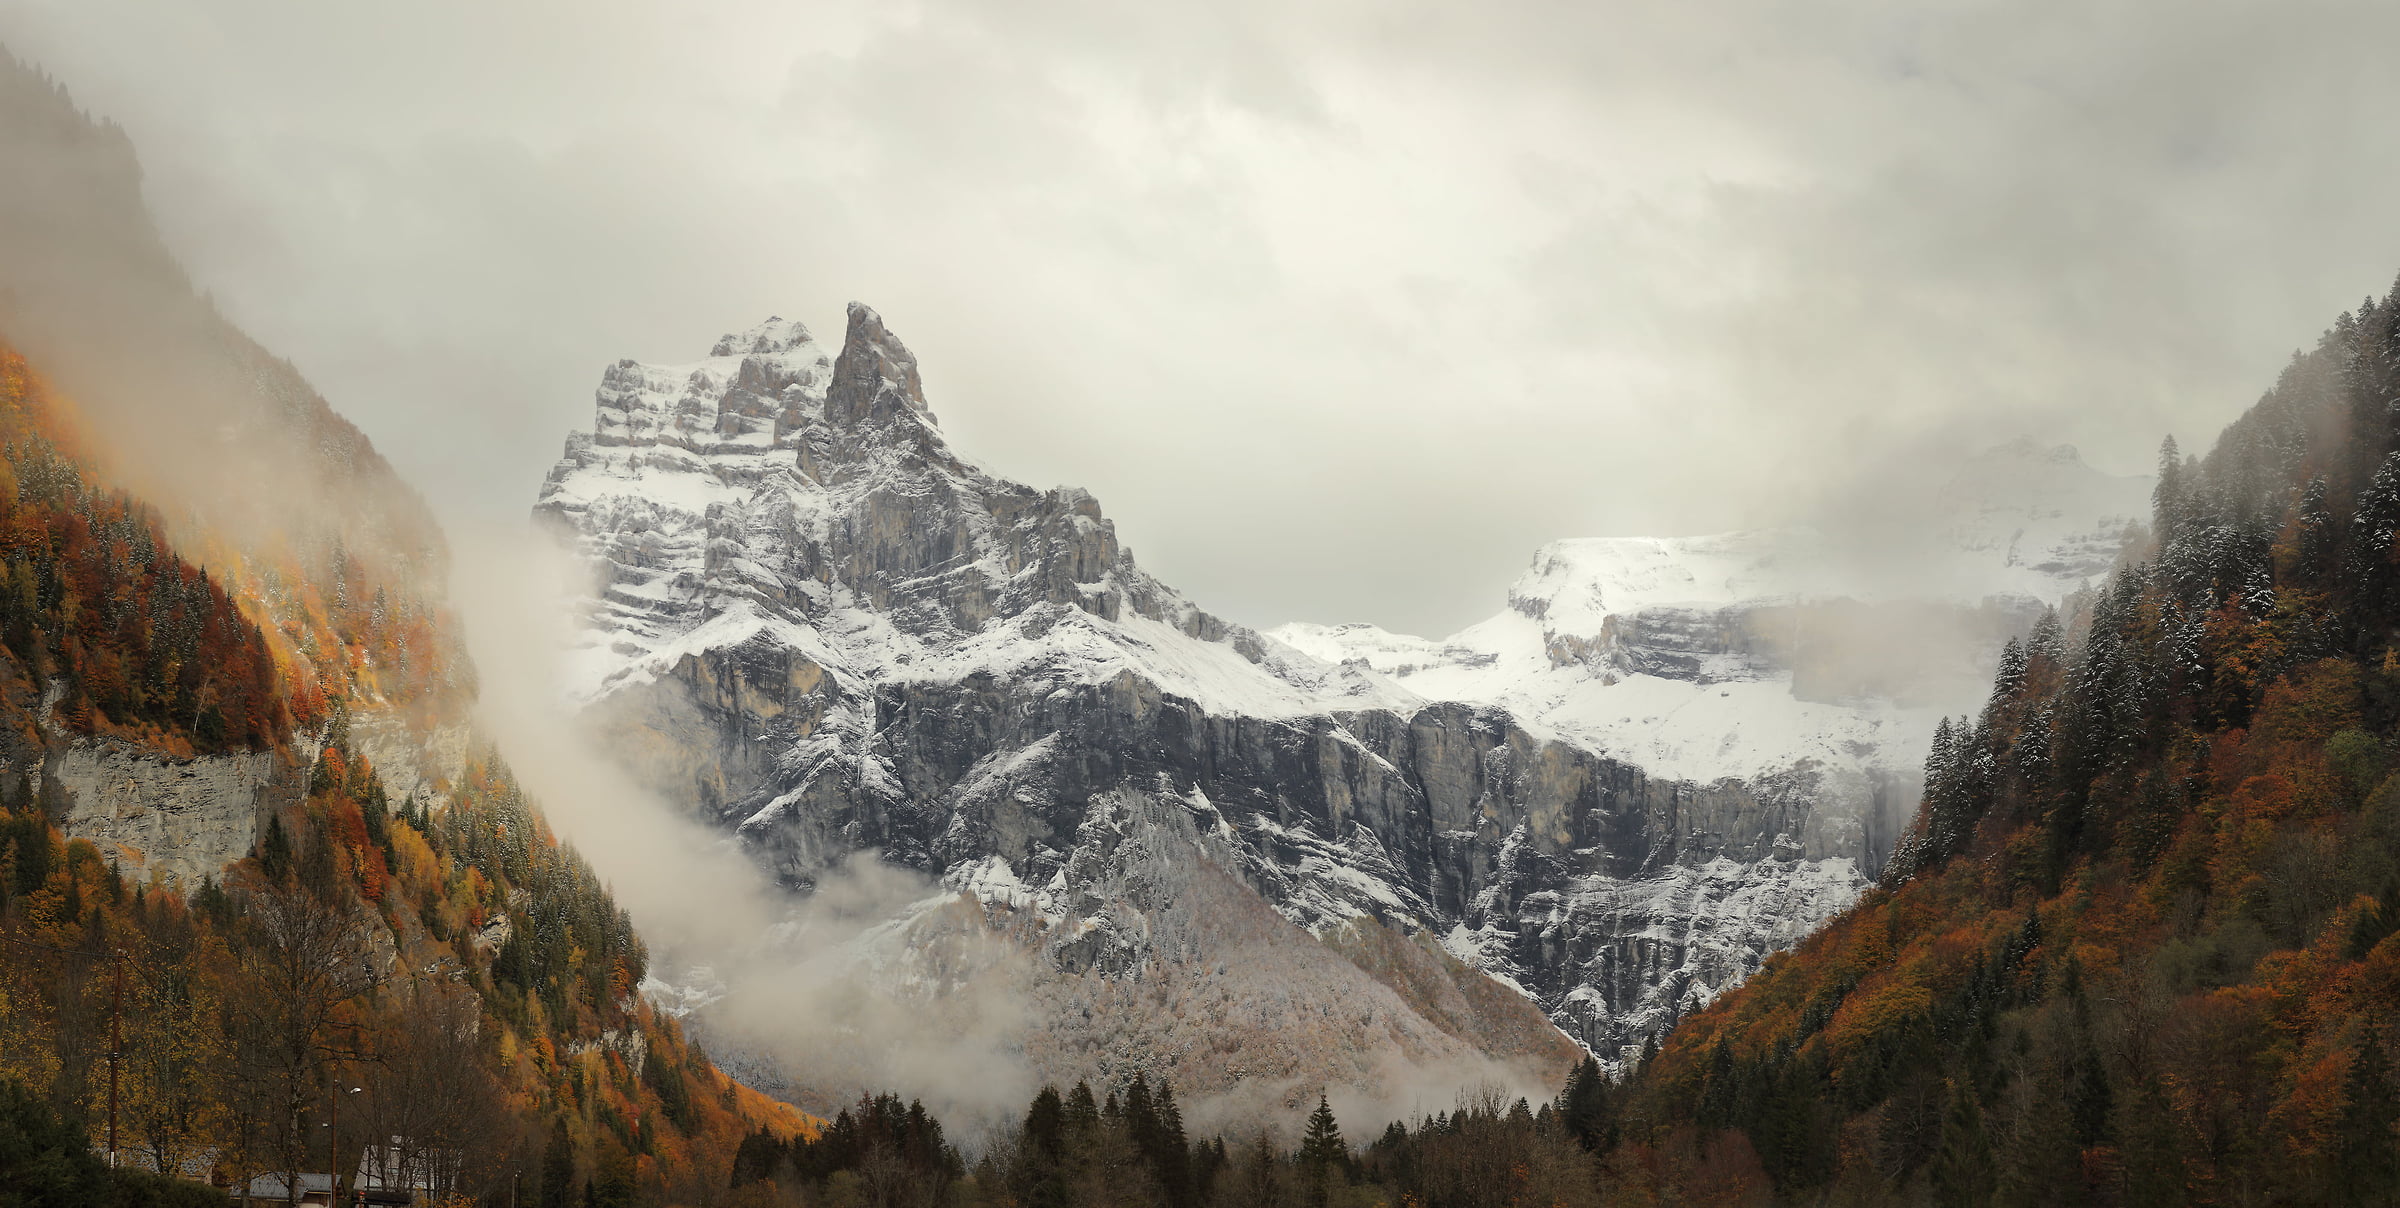 298 megapixels! A very high resolution, large-format VAST photo print of a mountain peak in autumn with fall foliage and a valley; landscape photograph created by Alexandre Deschaumes